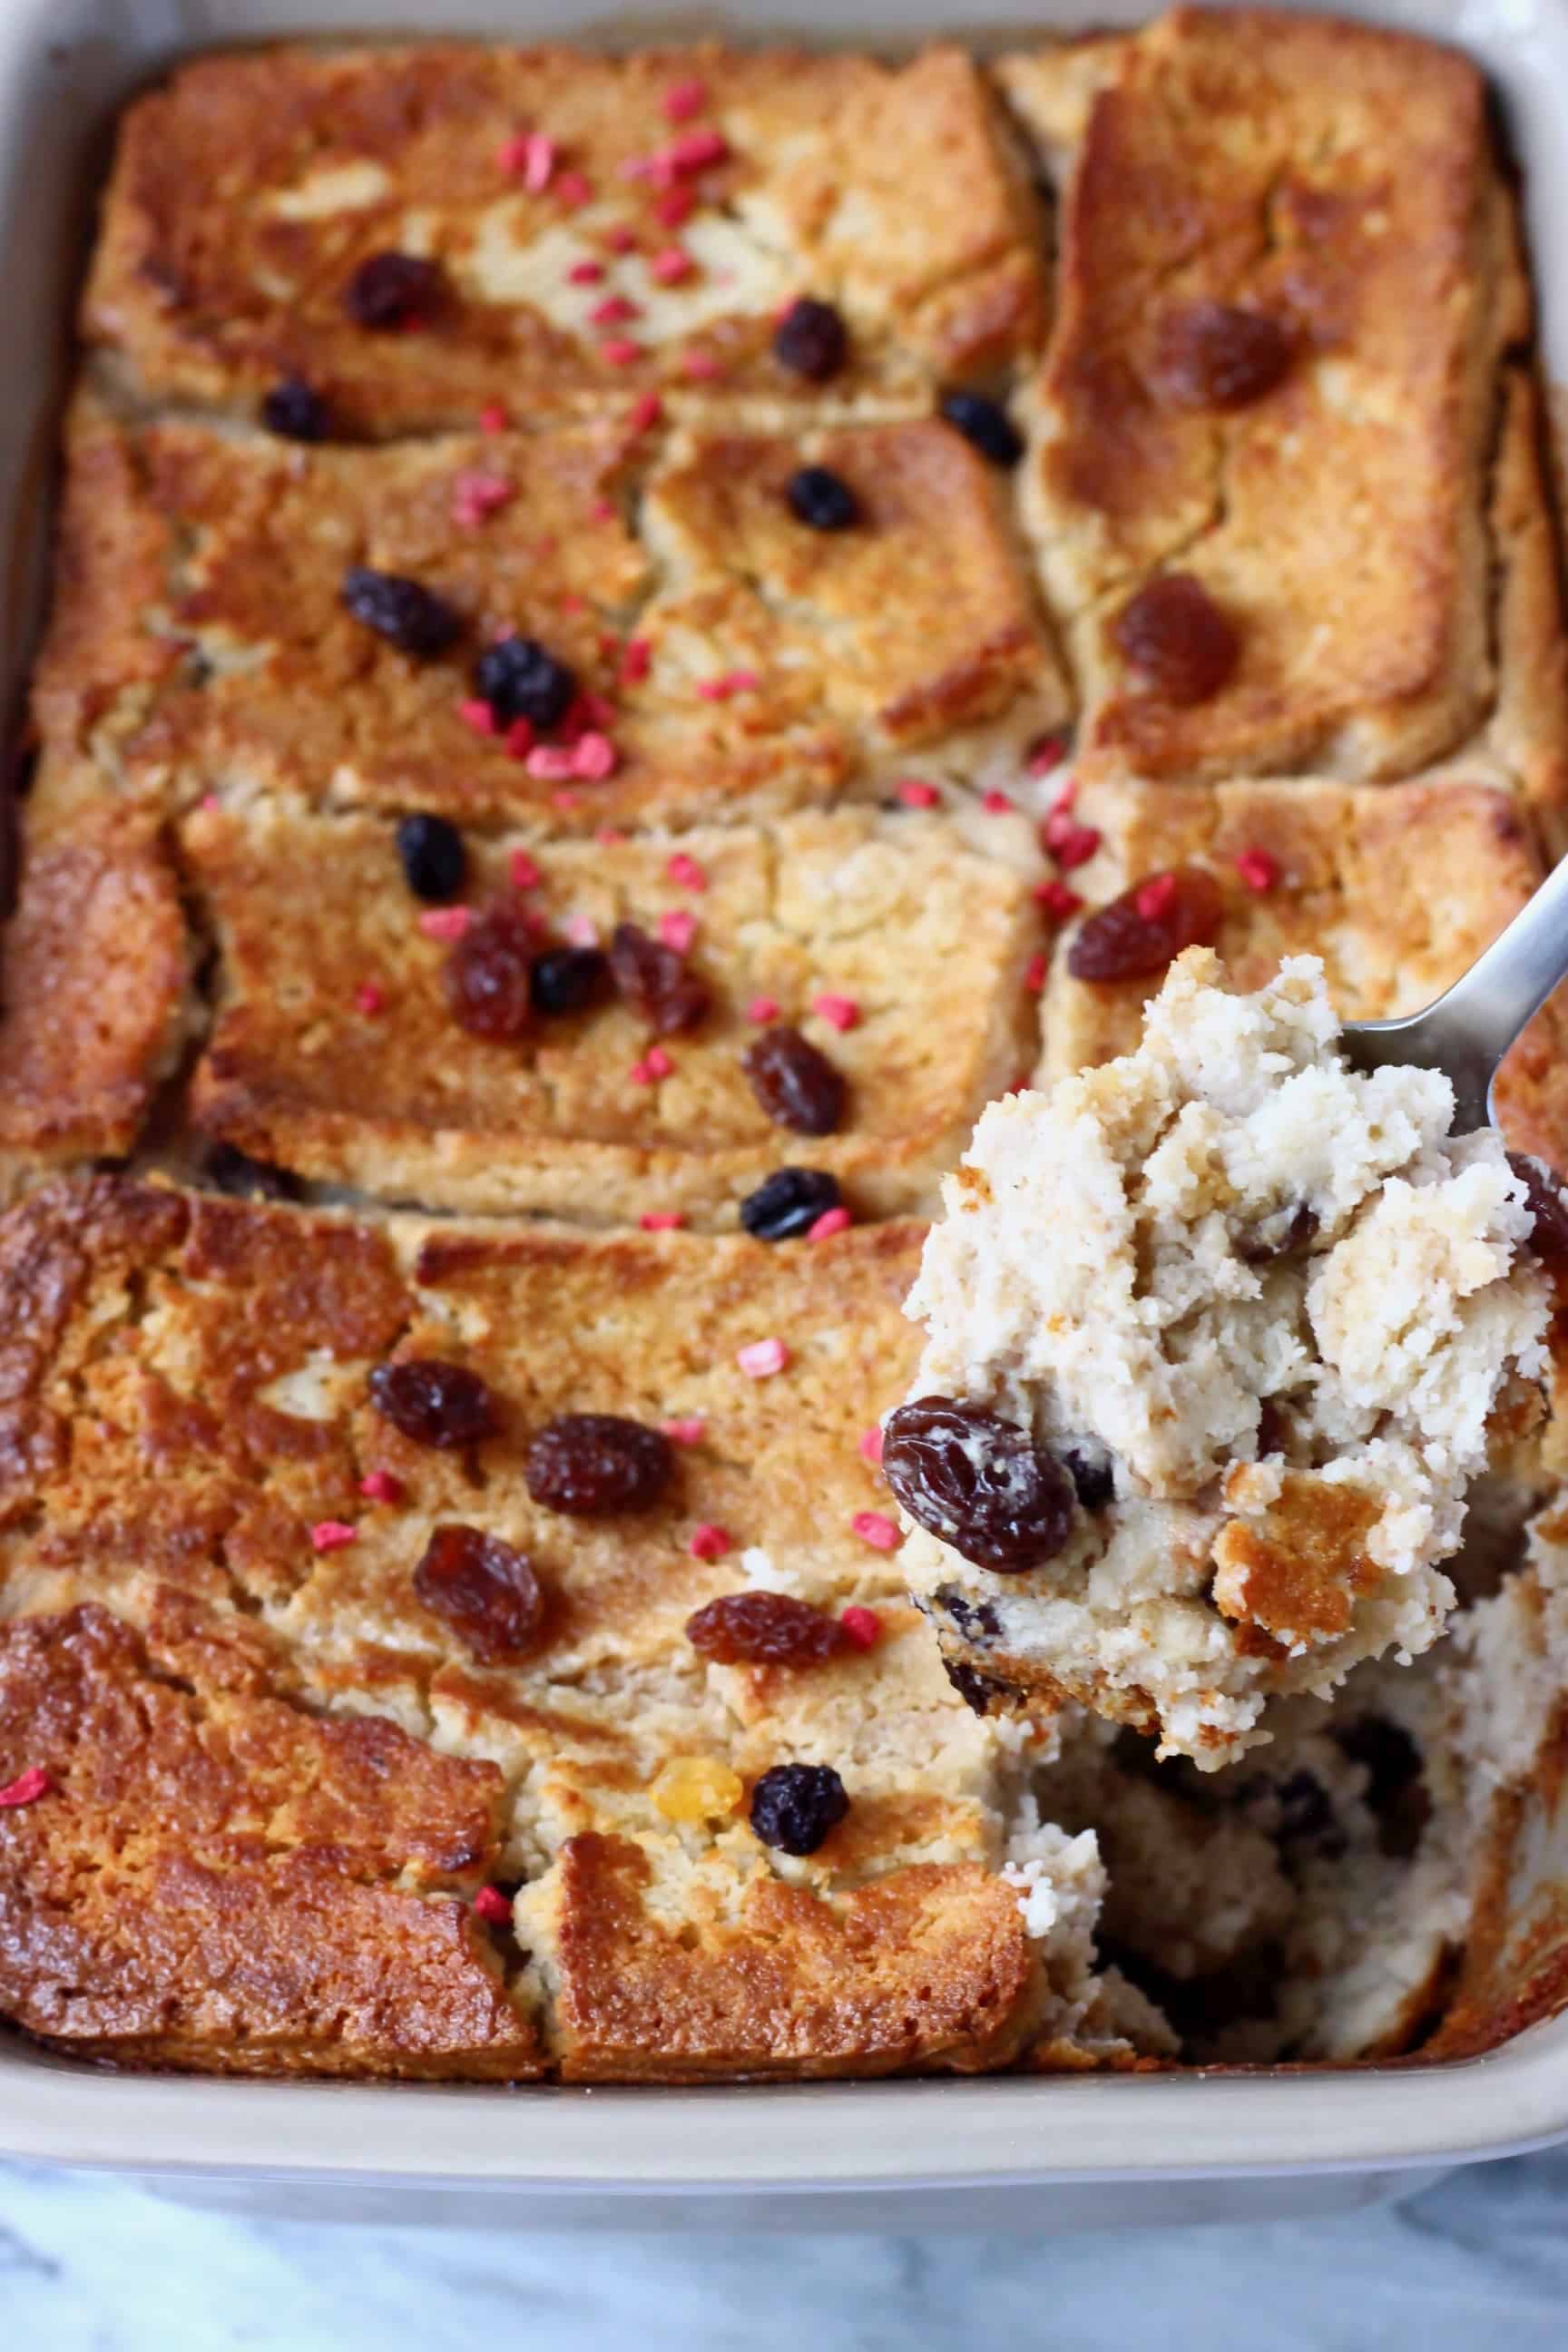 Vegan bread pudding in a grey rectangular baking dish sprinkled with raisins with a mouthful being held up with a spoon